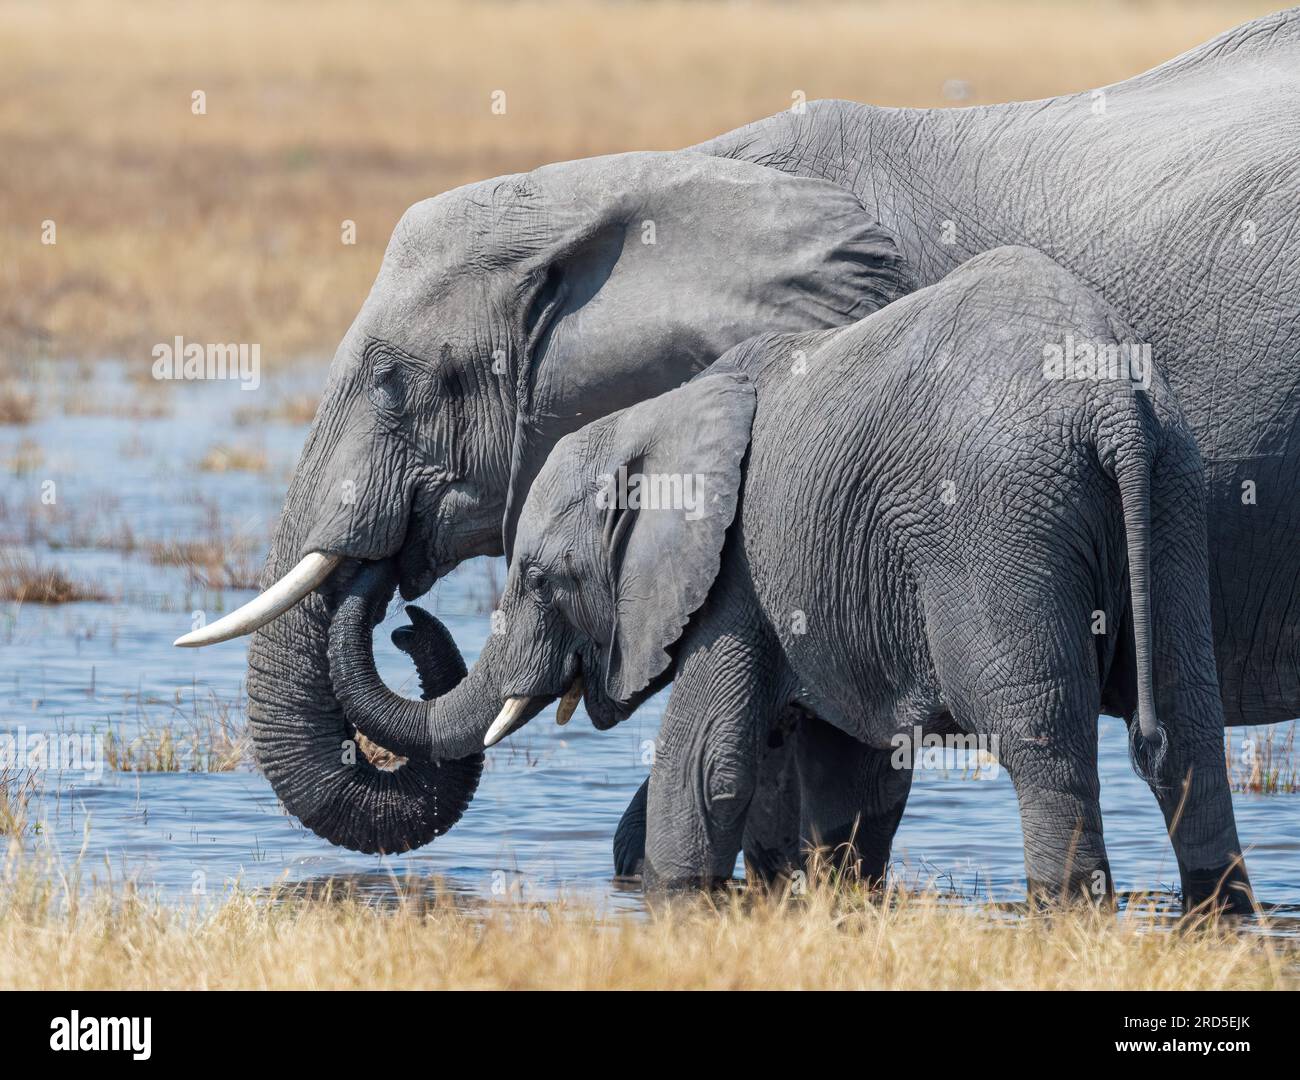 Mother and juvenile elephant with trunks entangled Stock Photo